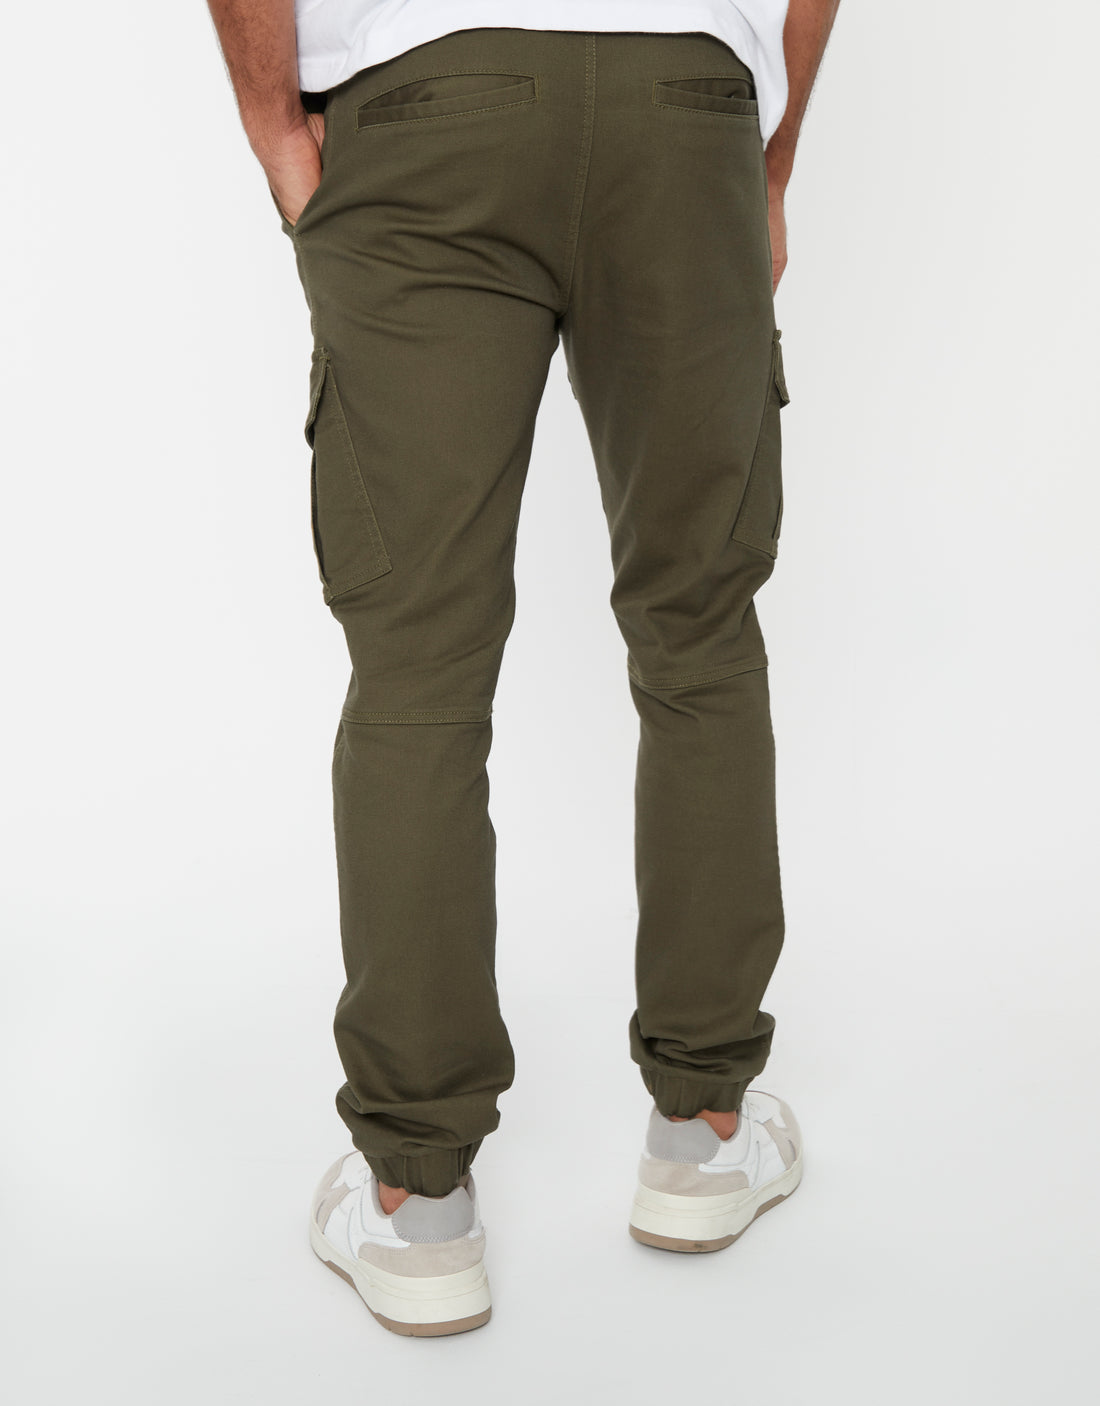 Men's Khaki Cargo Pocket Jogger Style Pull-On Cuffed Utility Trousers ...